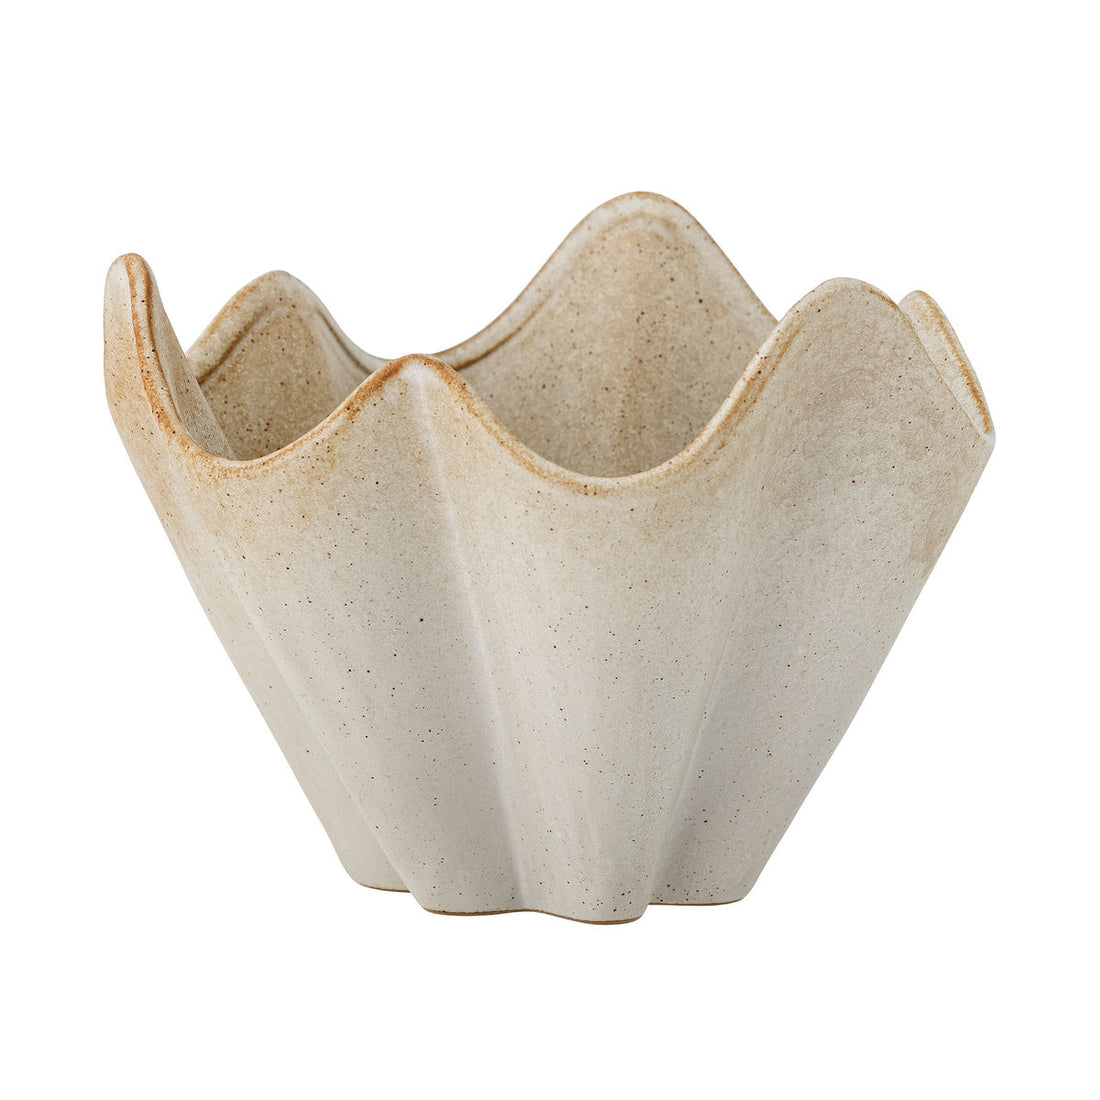 Bloomingville Rania Herbal Potted Hides, Nature, Stoneware